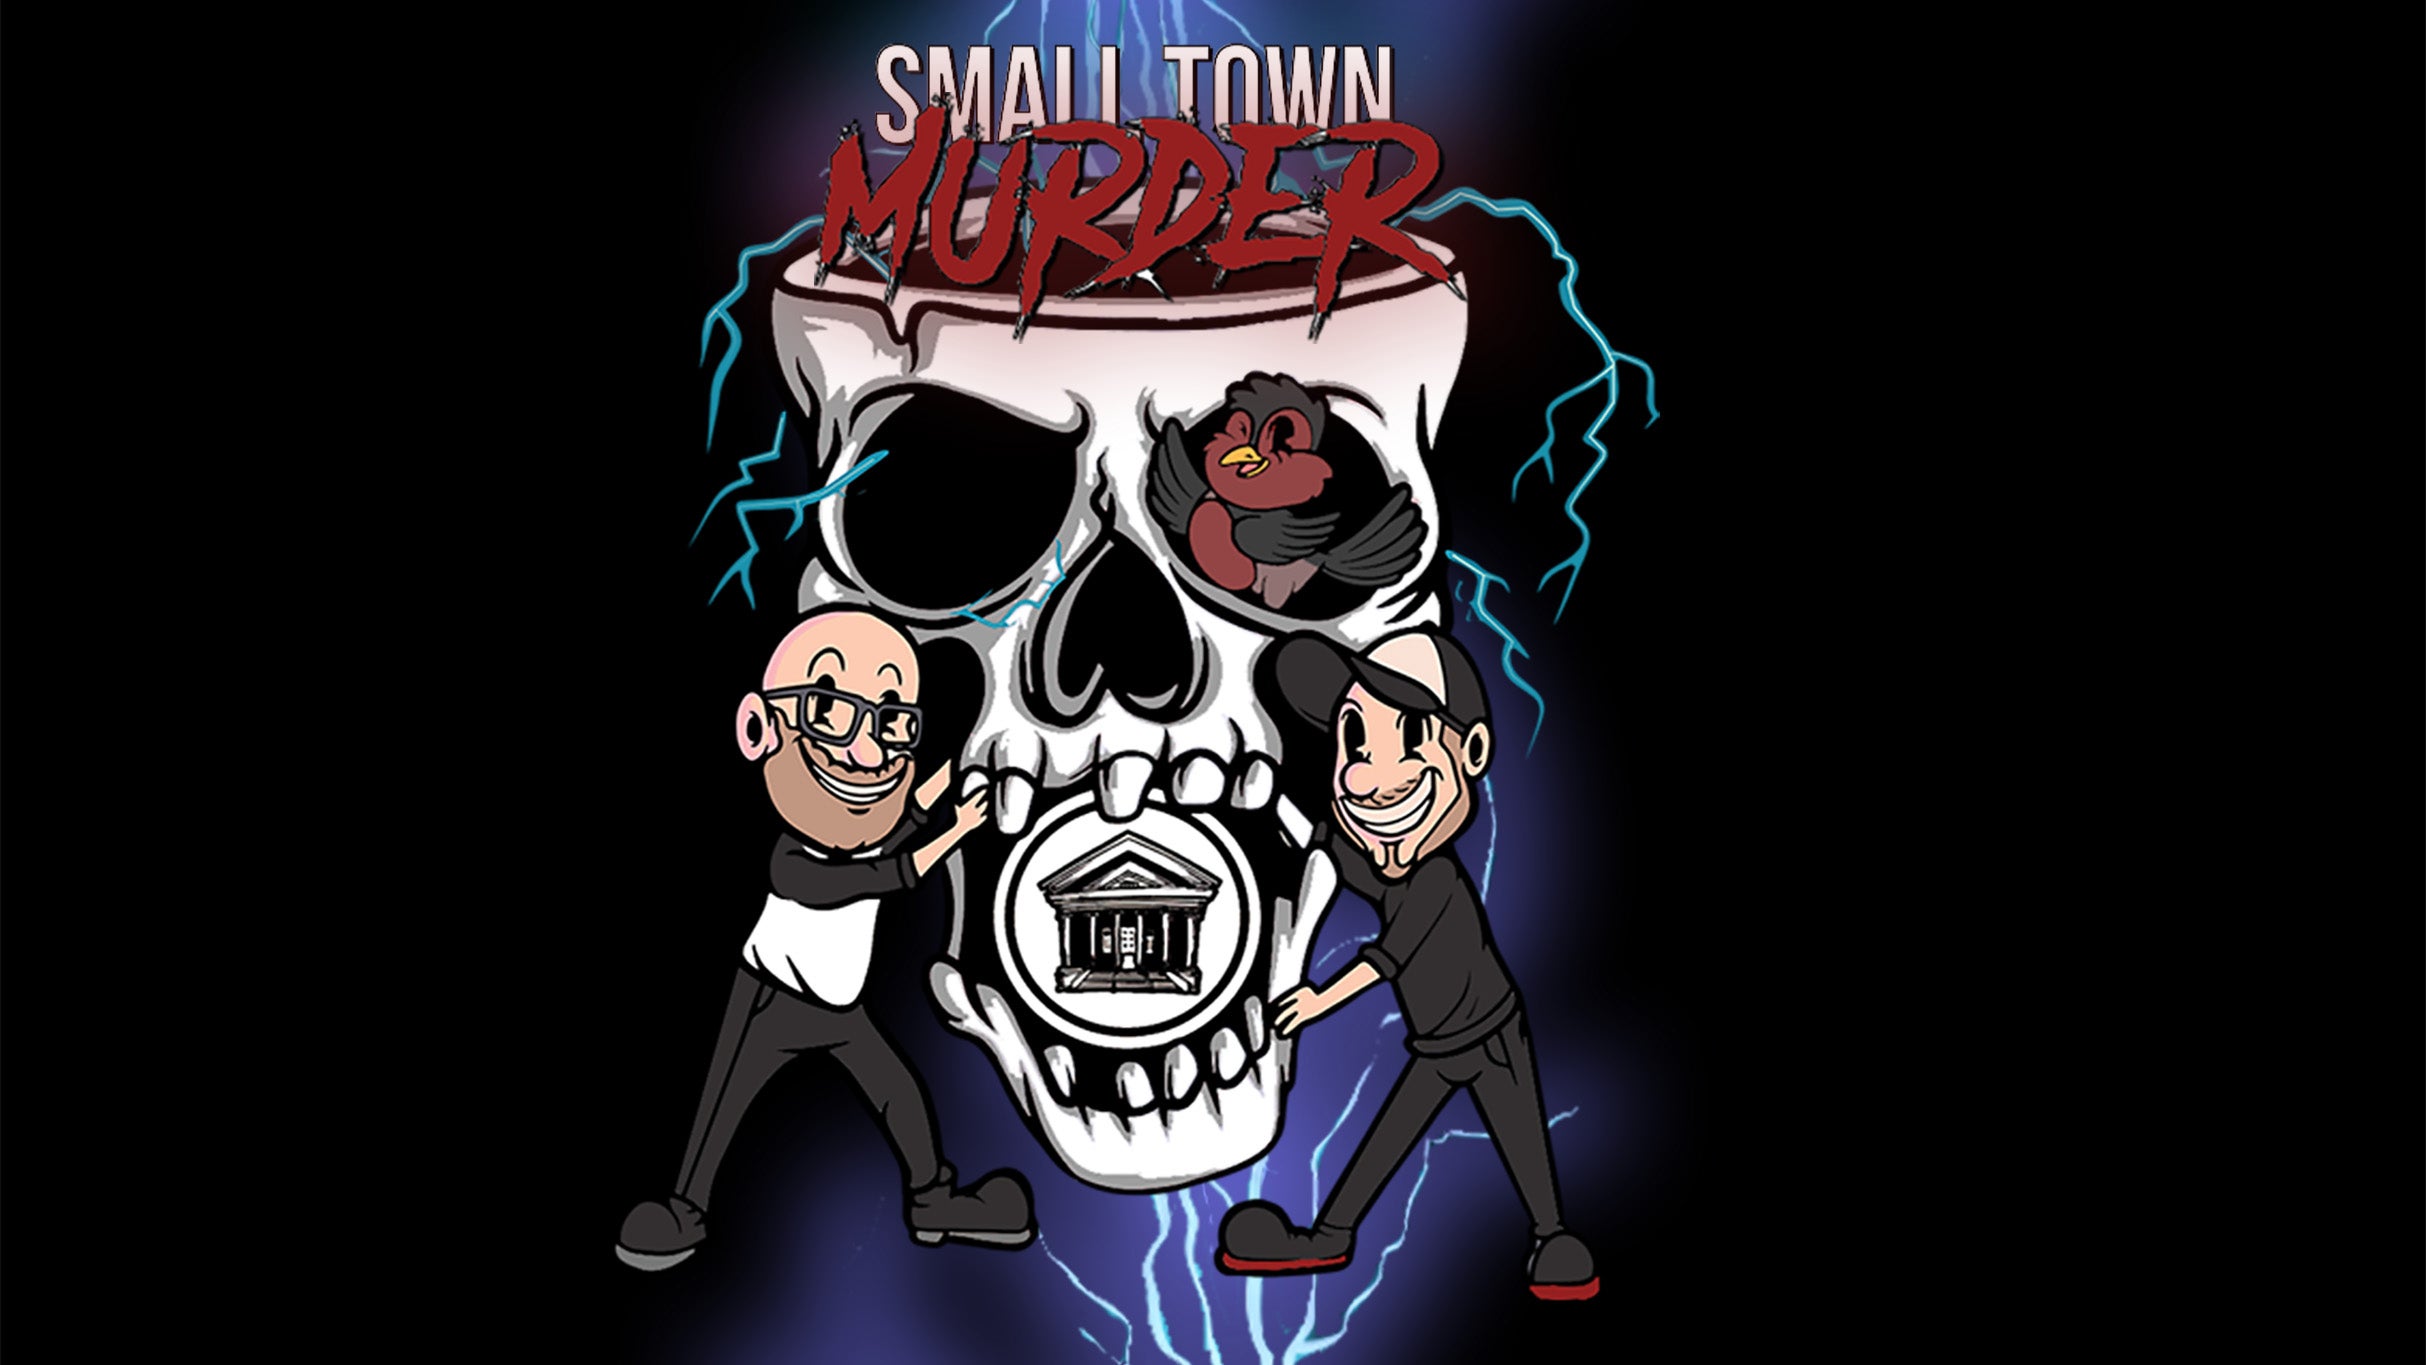 Small Town Murder Podcast at Neptune Theatre